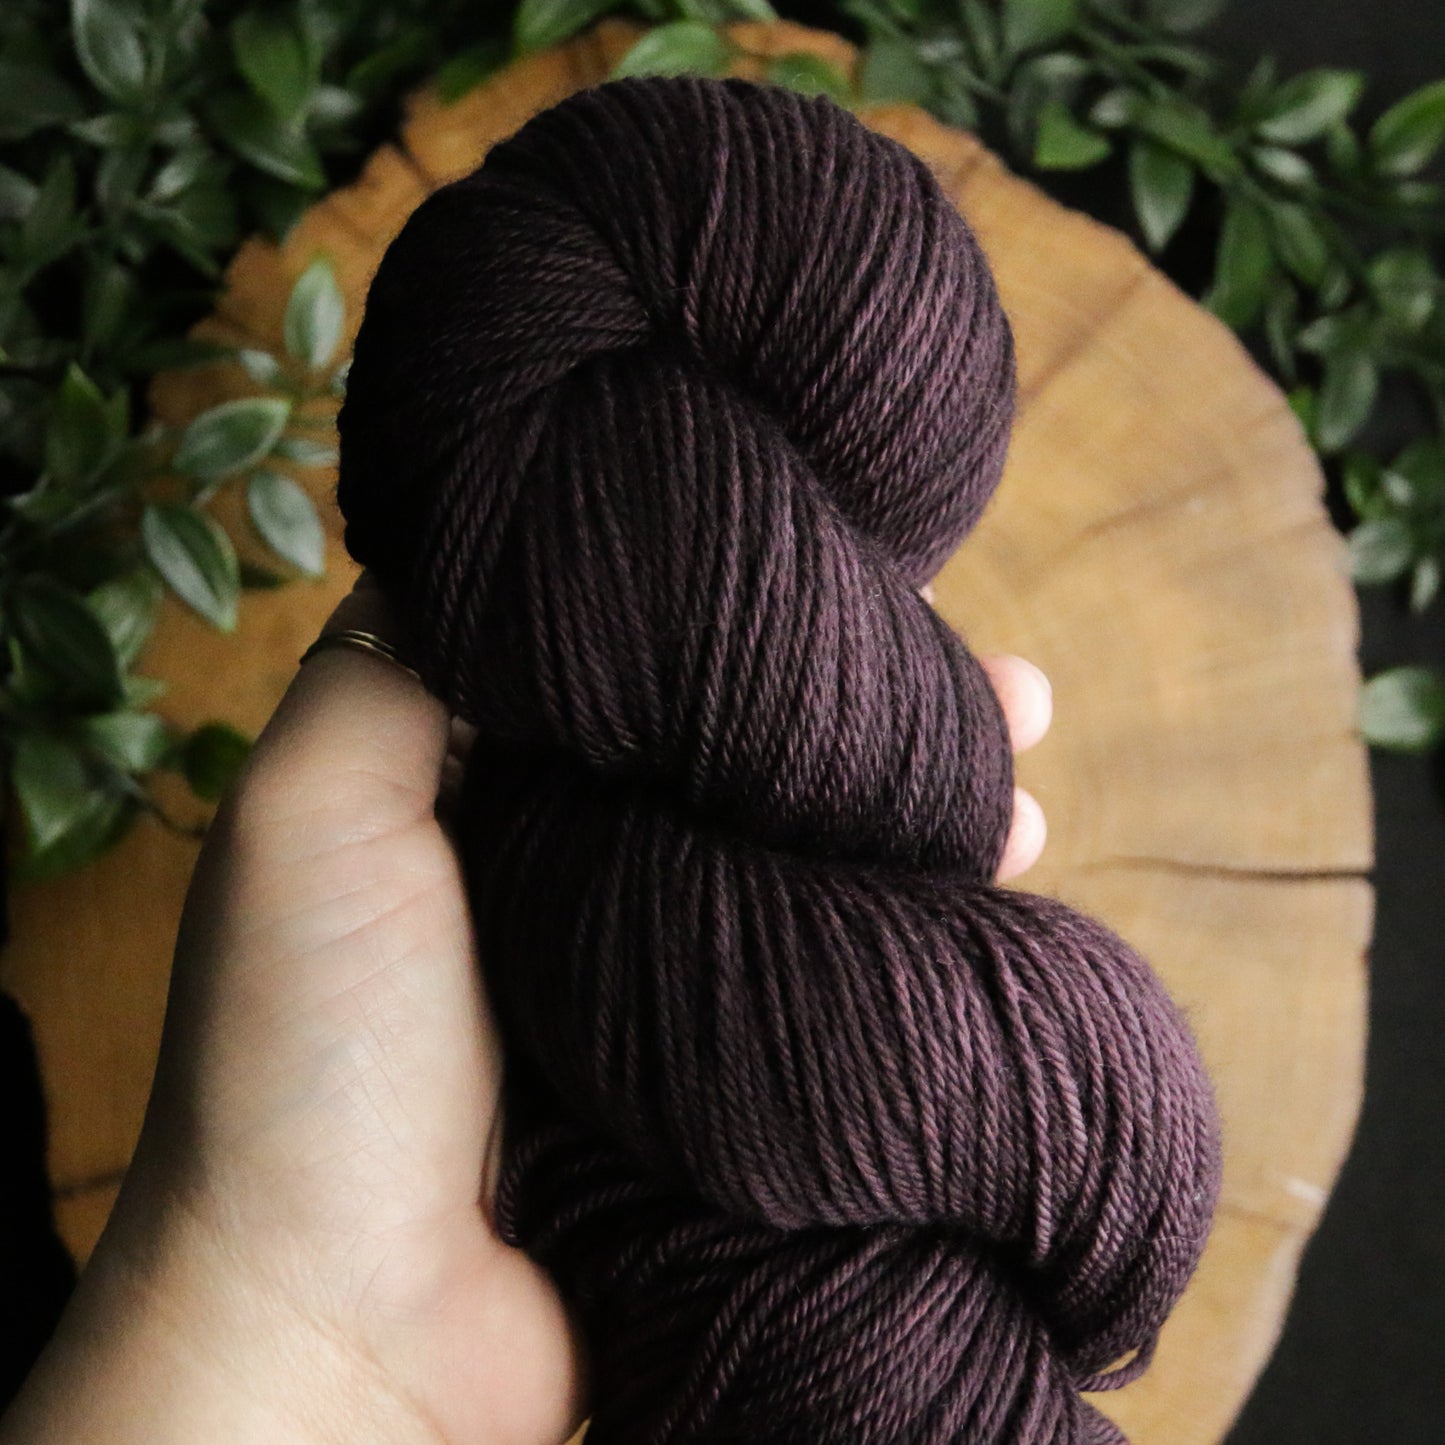 One of a Kind - Merino Squish - Fingering Weight